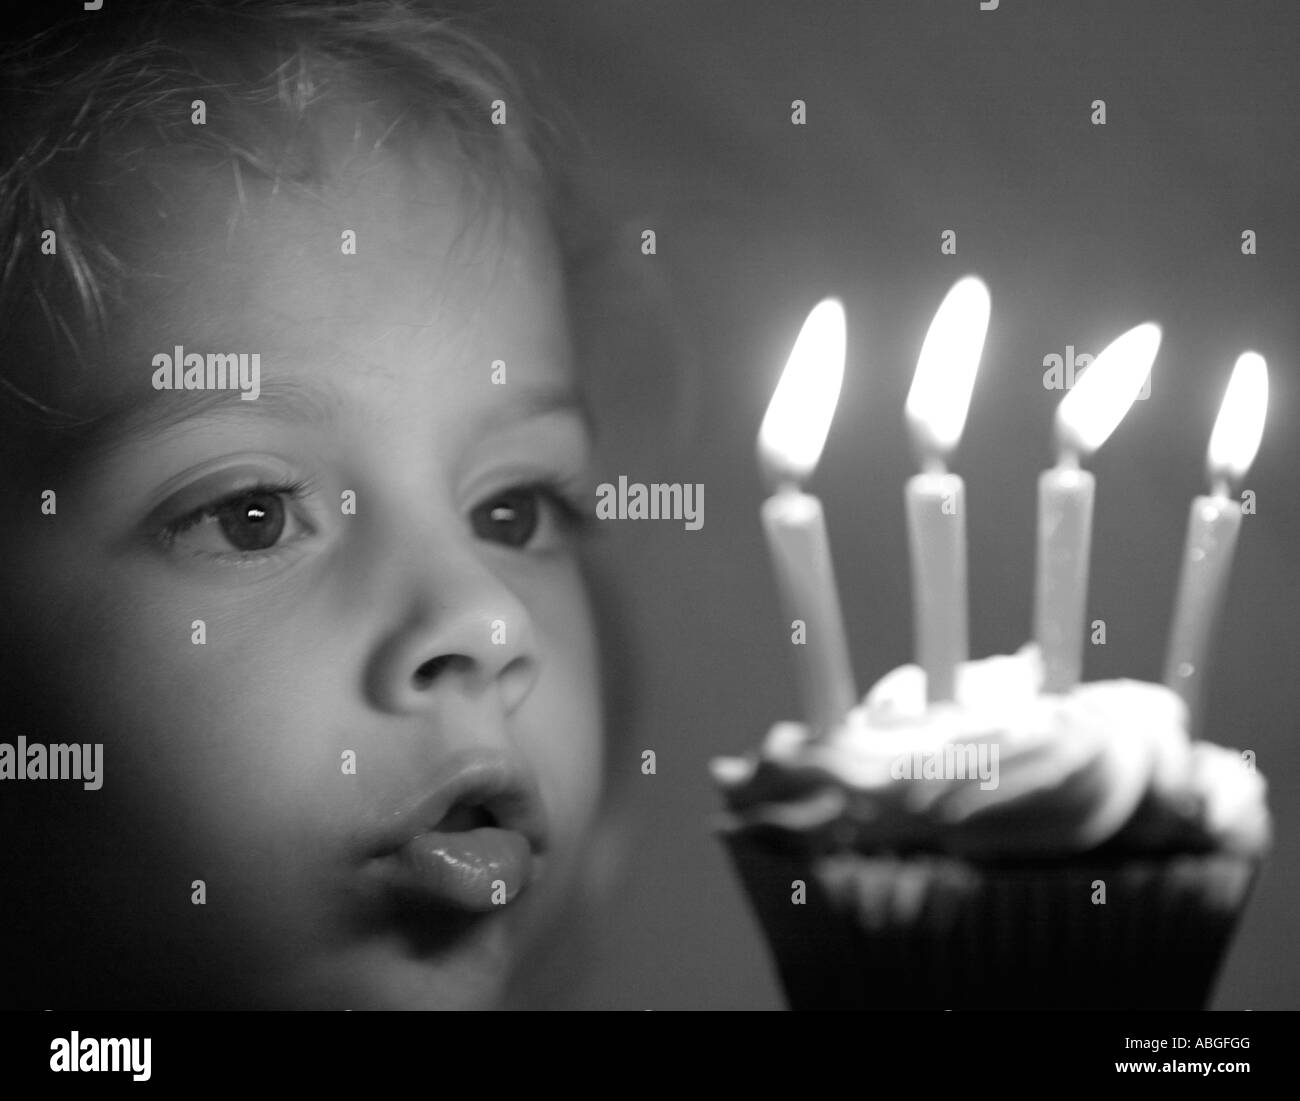 Child ready to blow out birthday candles Stock Photo